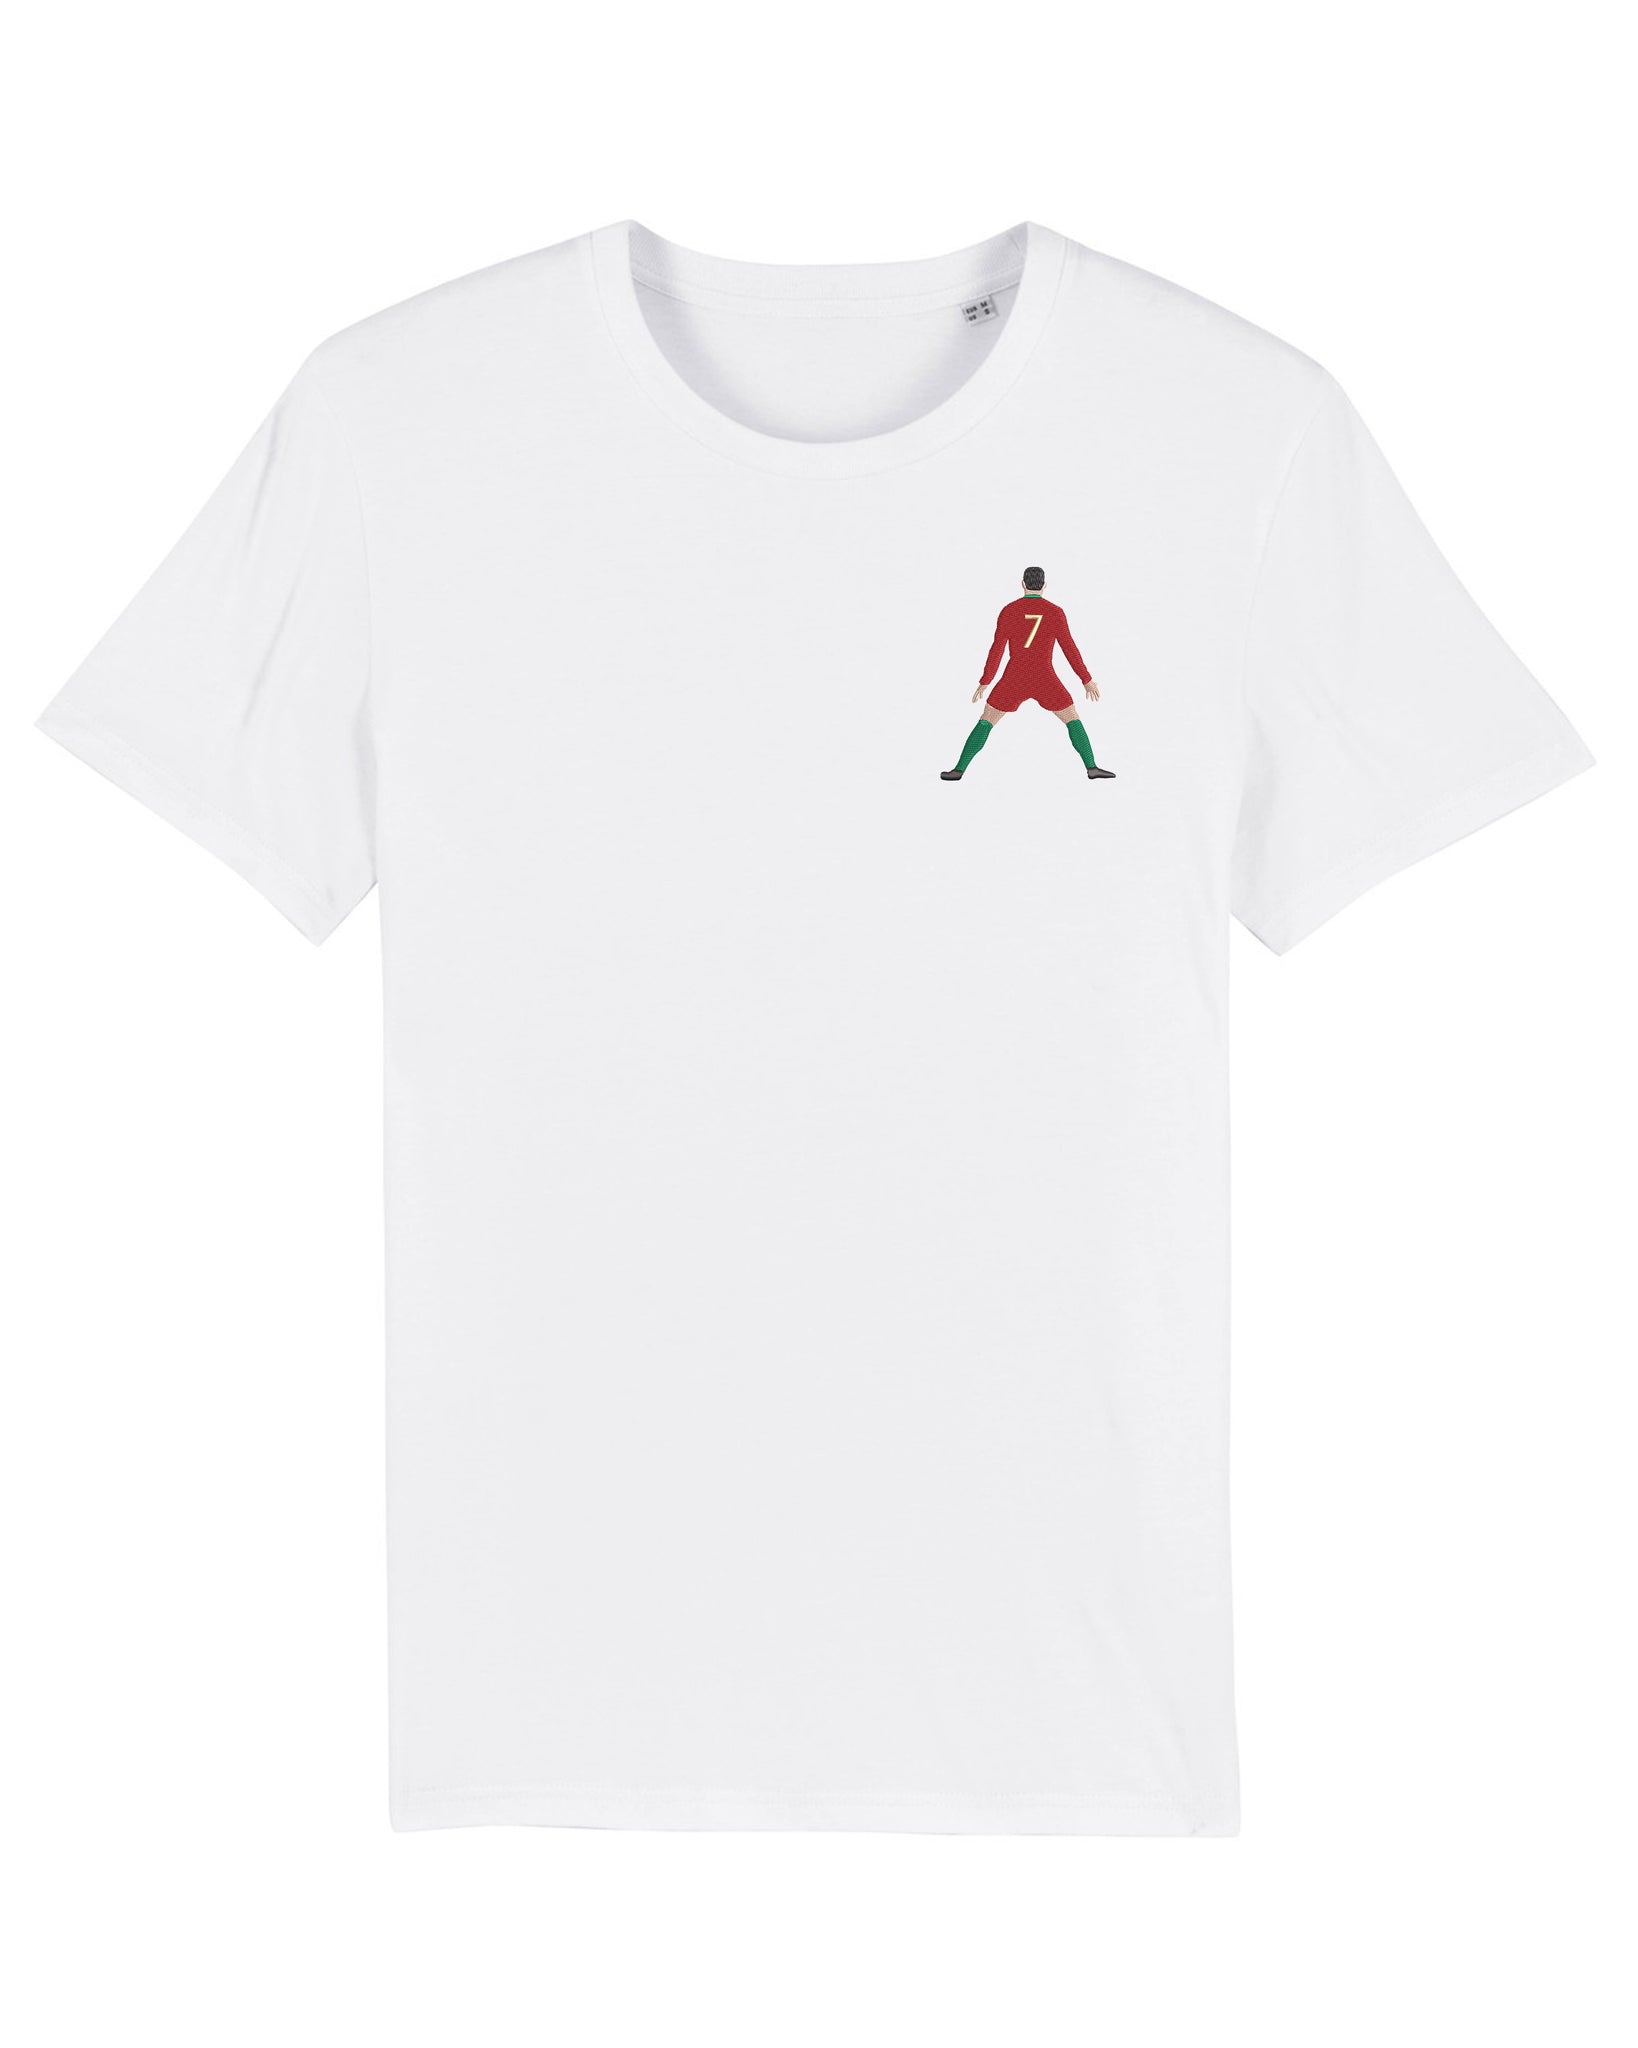 Embroidered CR7 Portugal Tee Shirt